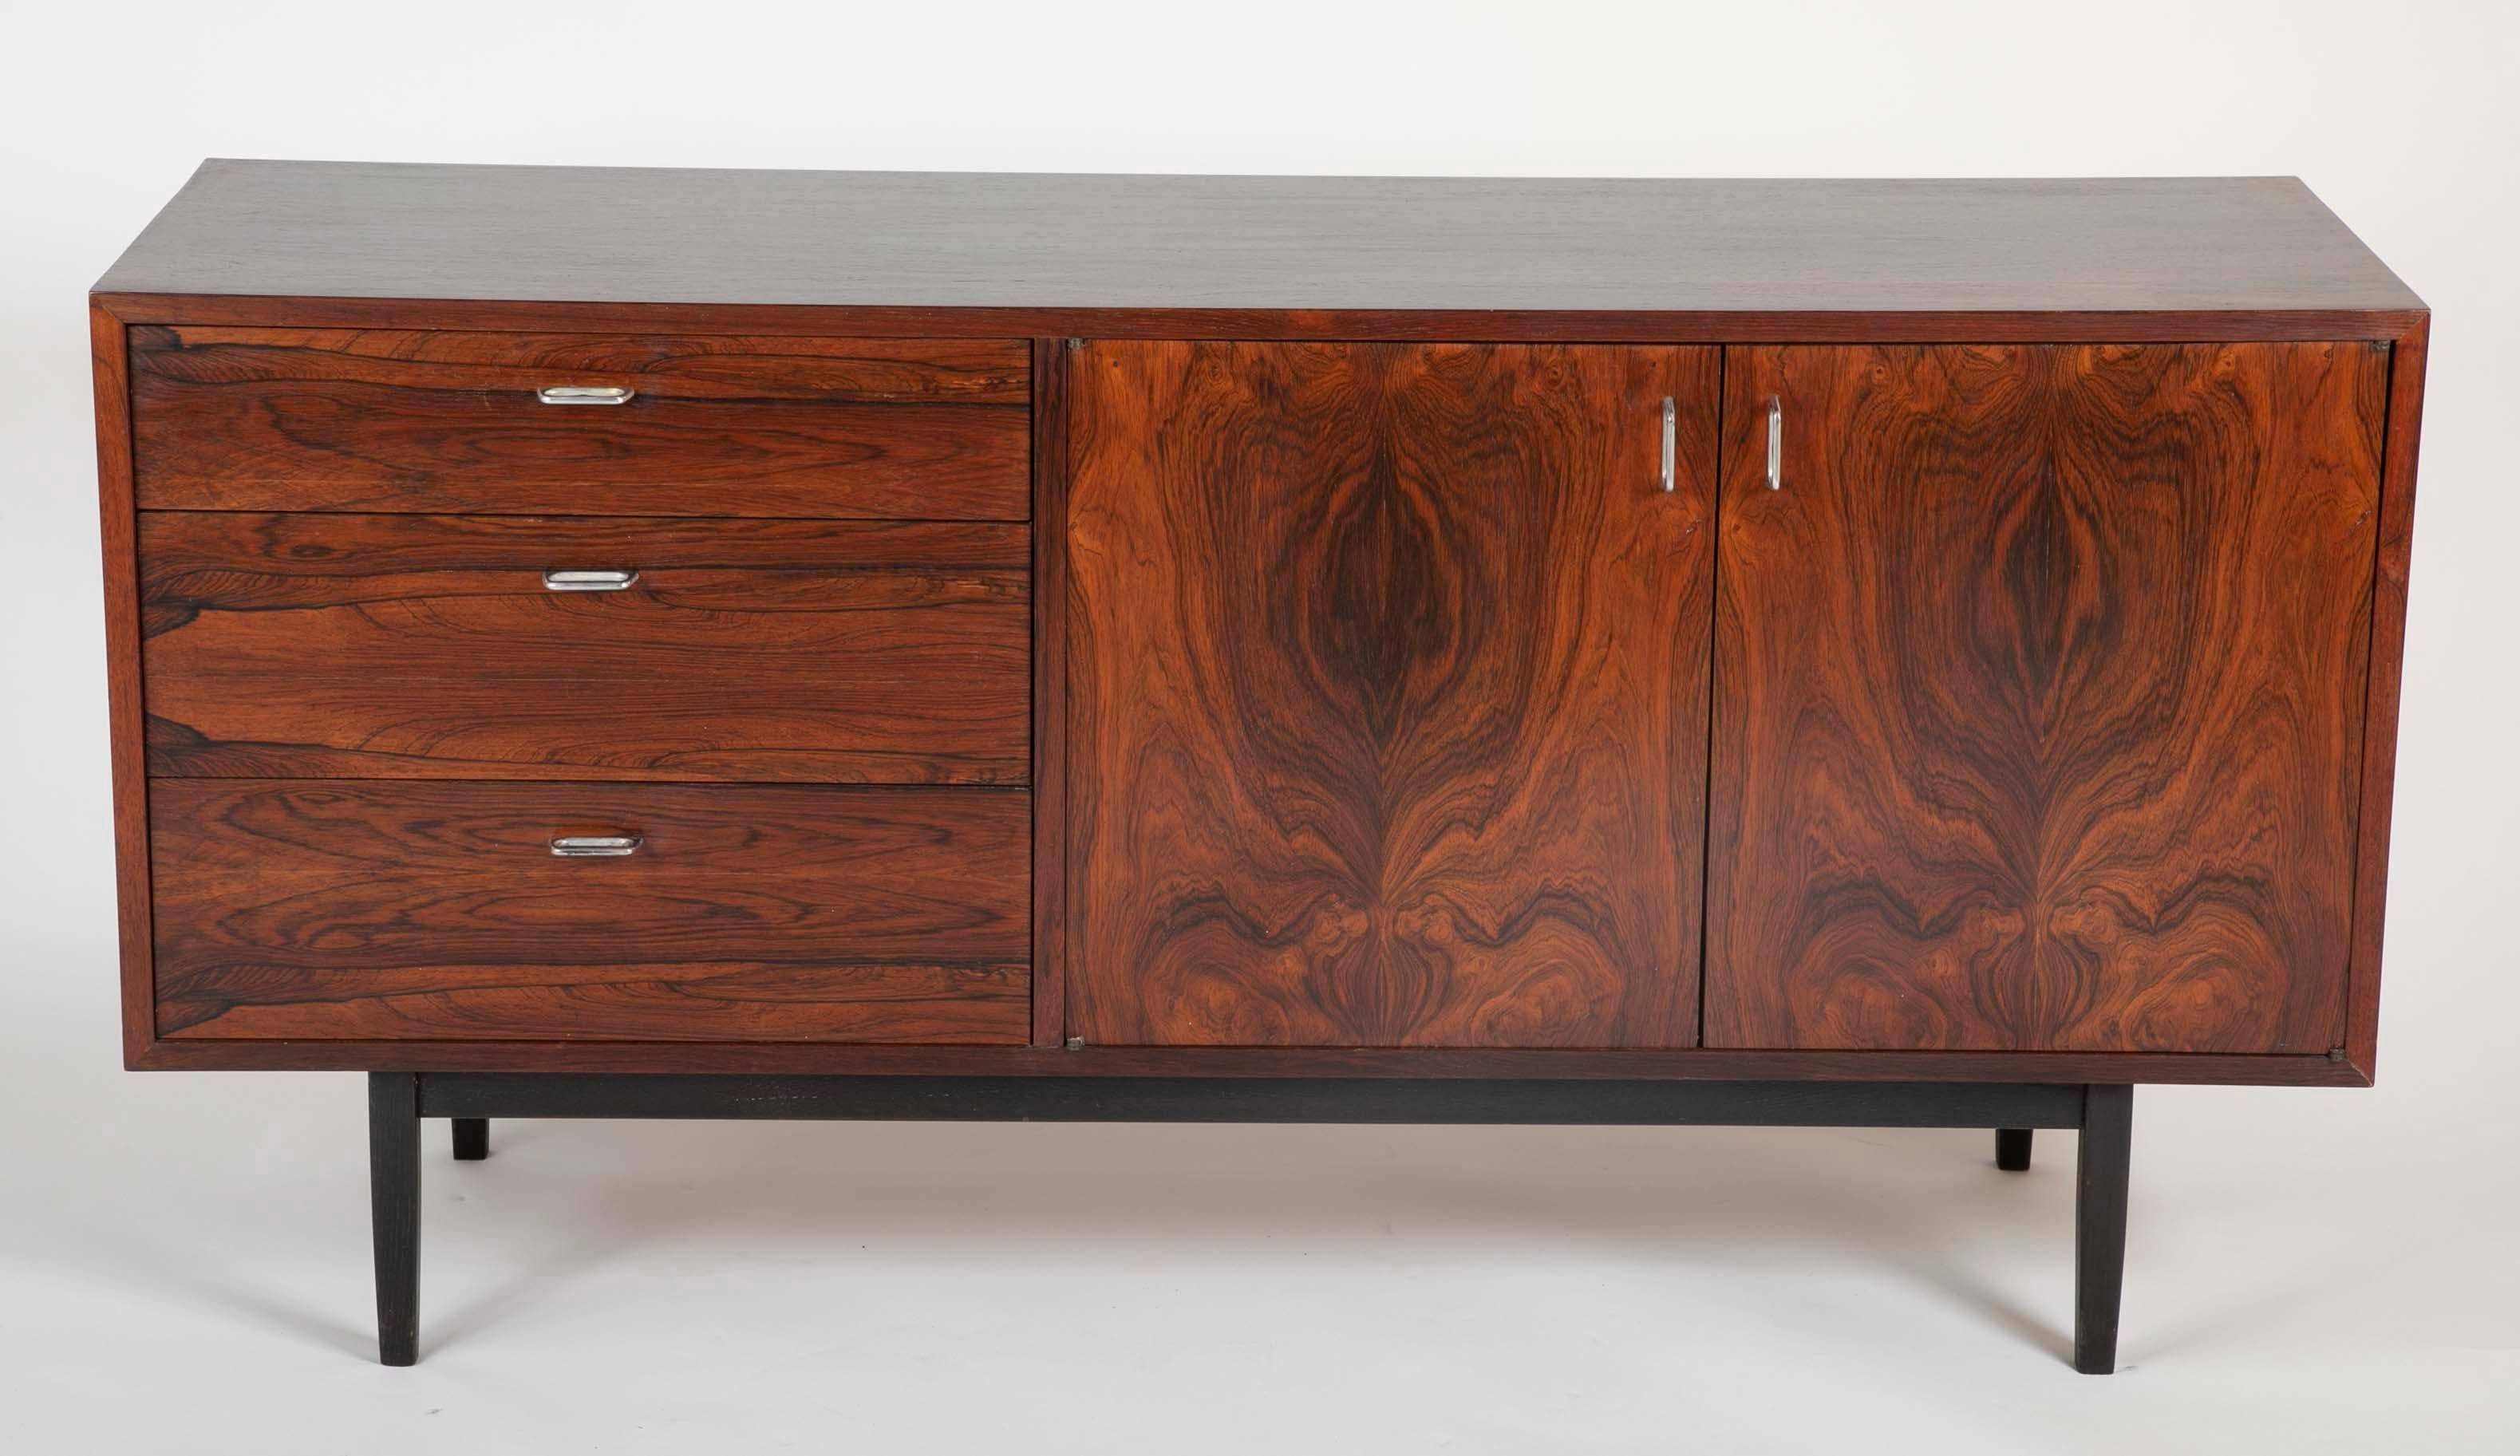 An interesting rosewood sideboard or credenza with ebonized legs and sculptural aluminum handles. Having one two-door compartment and on the other side three draws; the top of which is divided for cutlery. Newly restored.